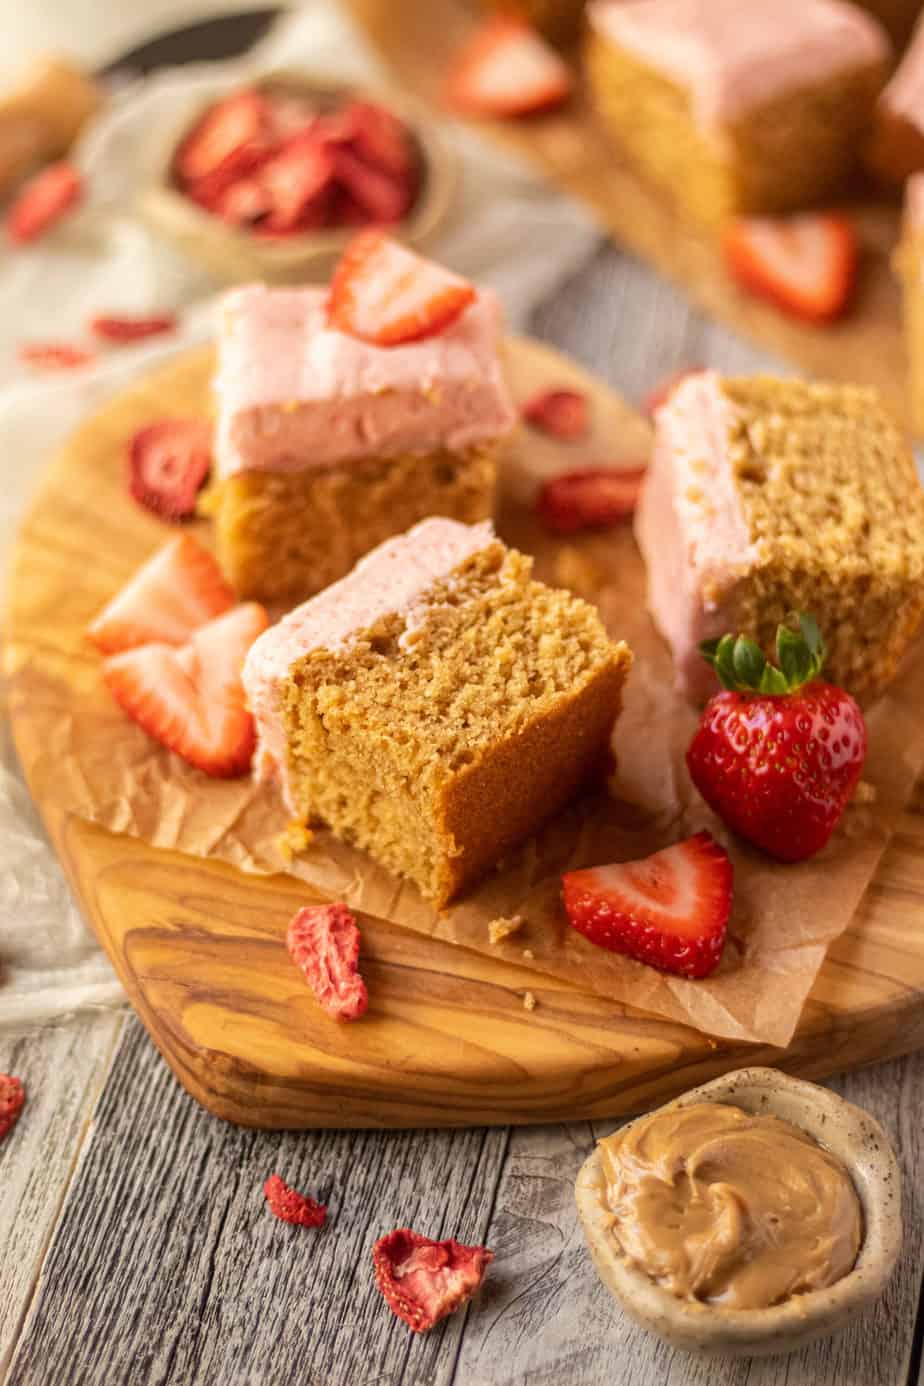 side angle shot of sliced peanut butter cake with strawberry frosting on a wooden cutting board. sliced strawberries scattered in perimeter of shot.